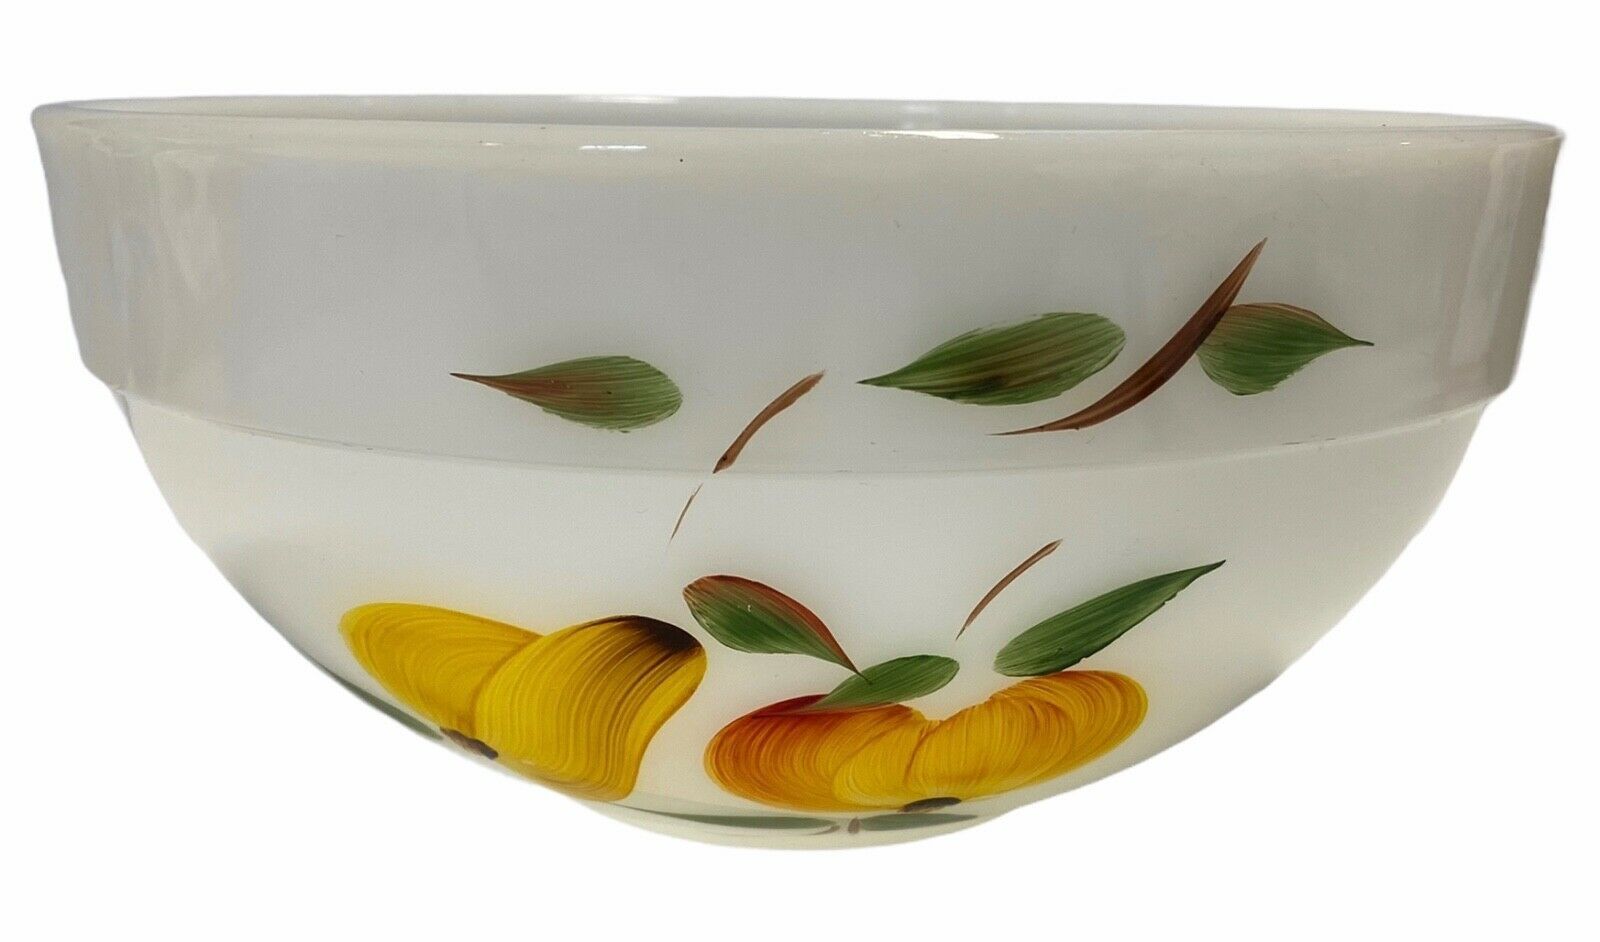 Primary image for Anchor Hocking Fire King Milk Glass Bowl w/ Handpainted Fruit Design Made in USA